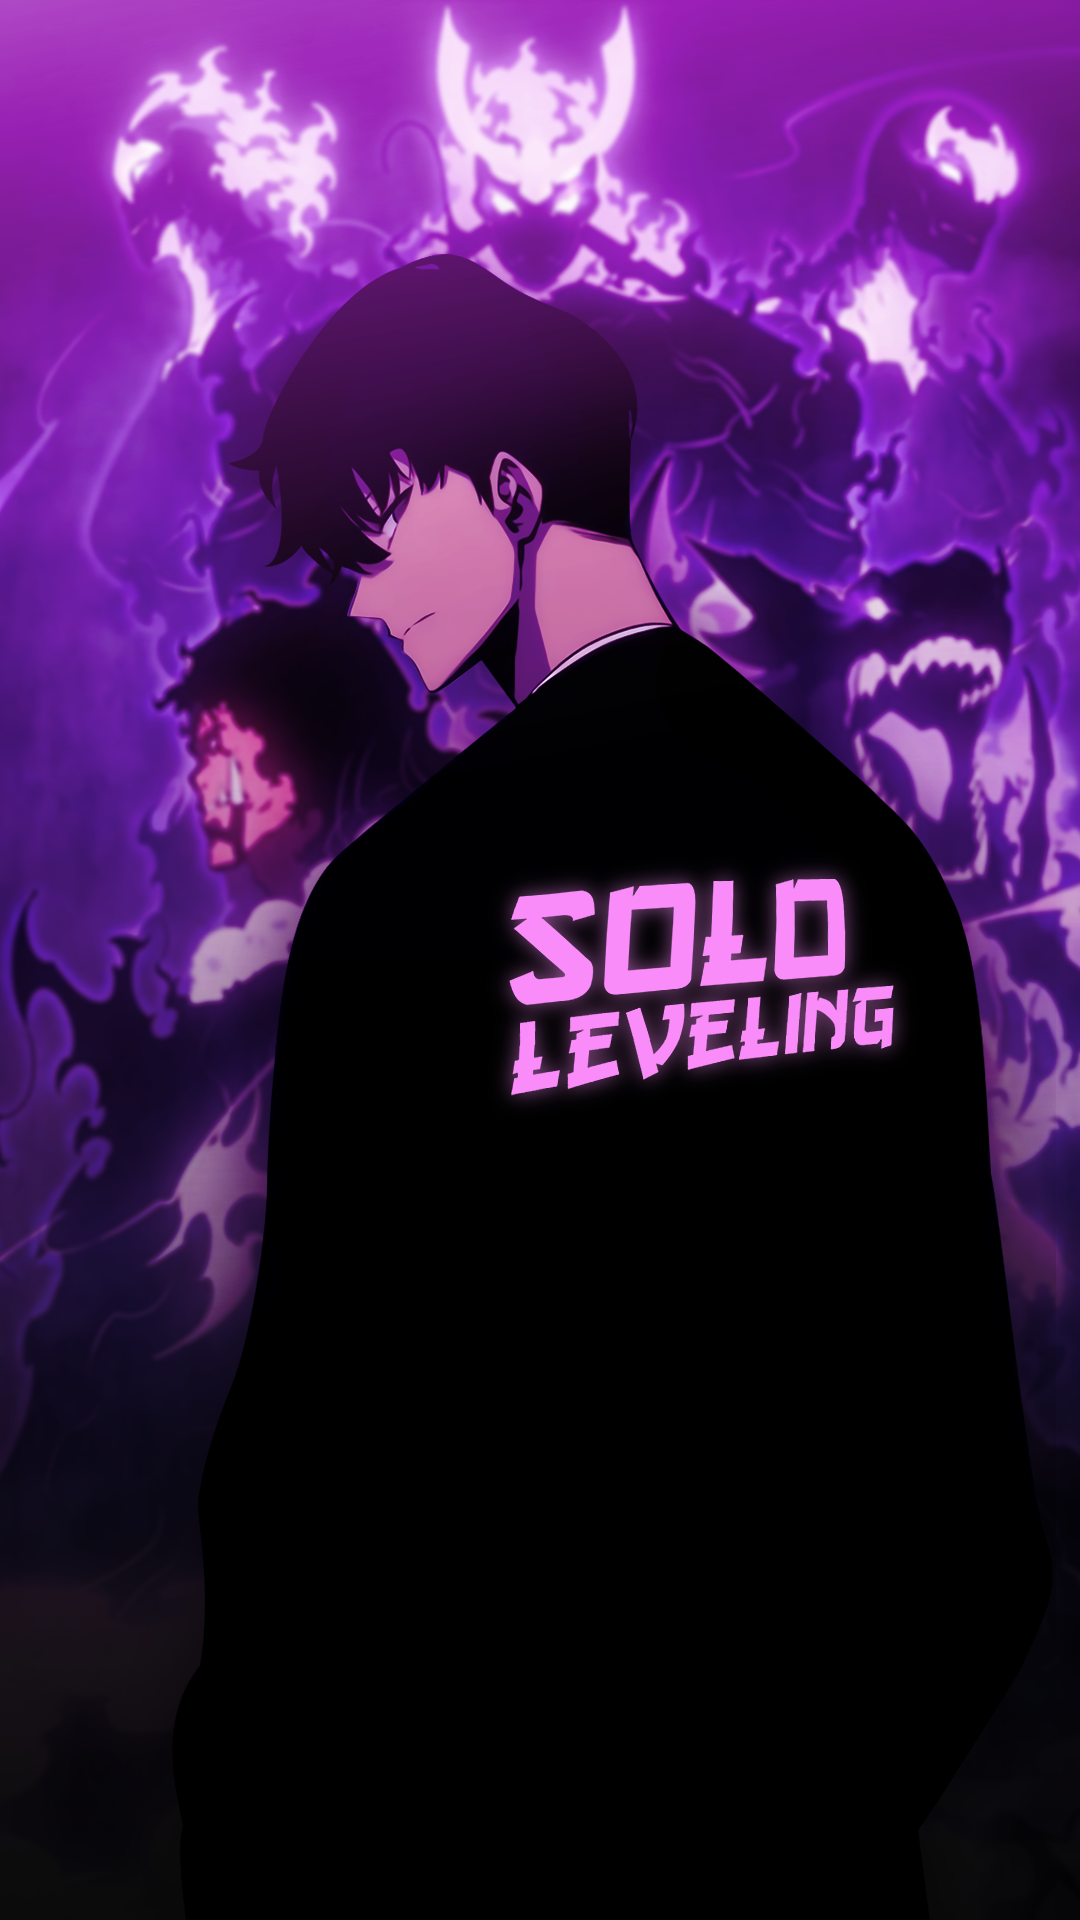 Wallpaper ID 300031  Anime Solo Leveling Phone Wallpaper Sung JinWoo  1536x2048 free download